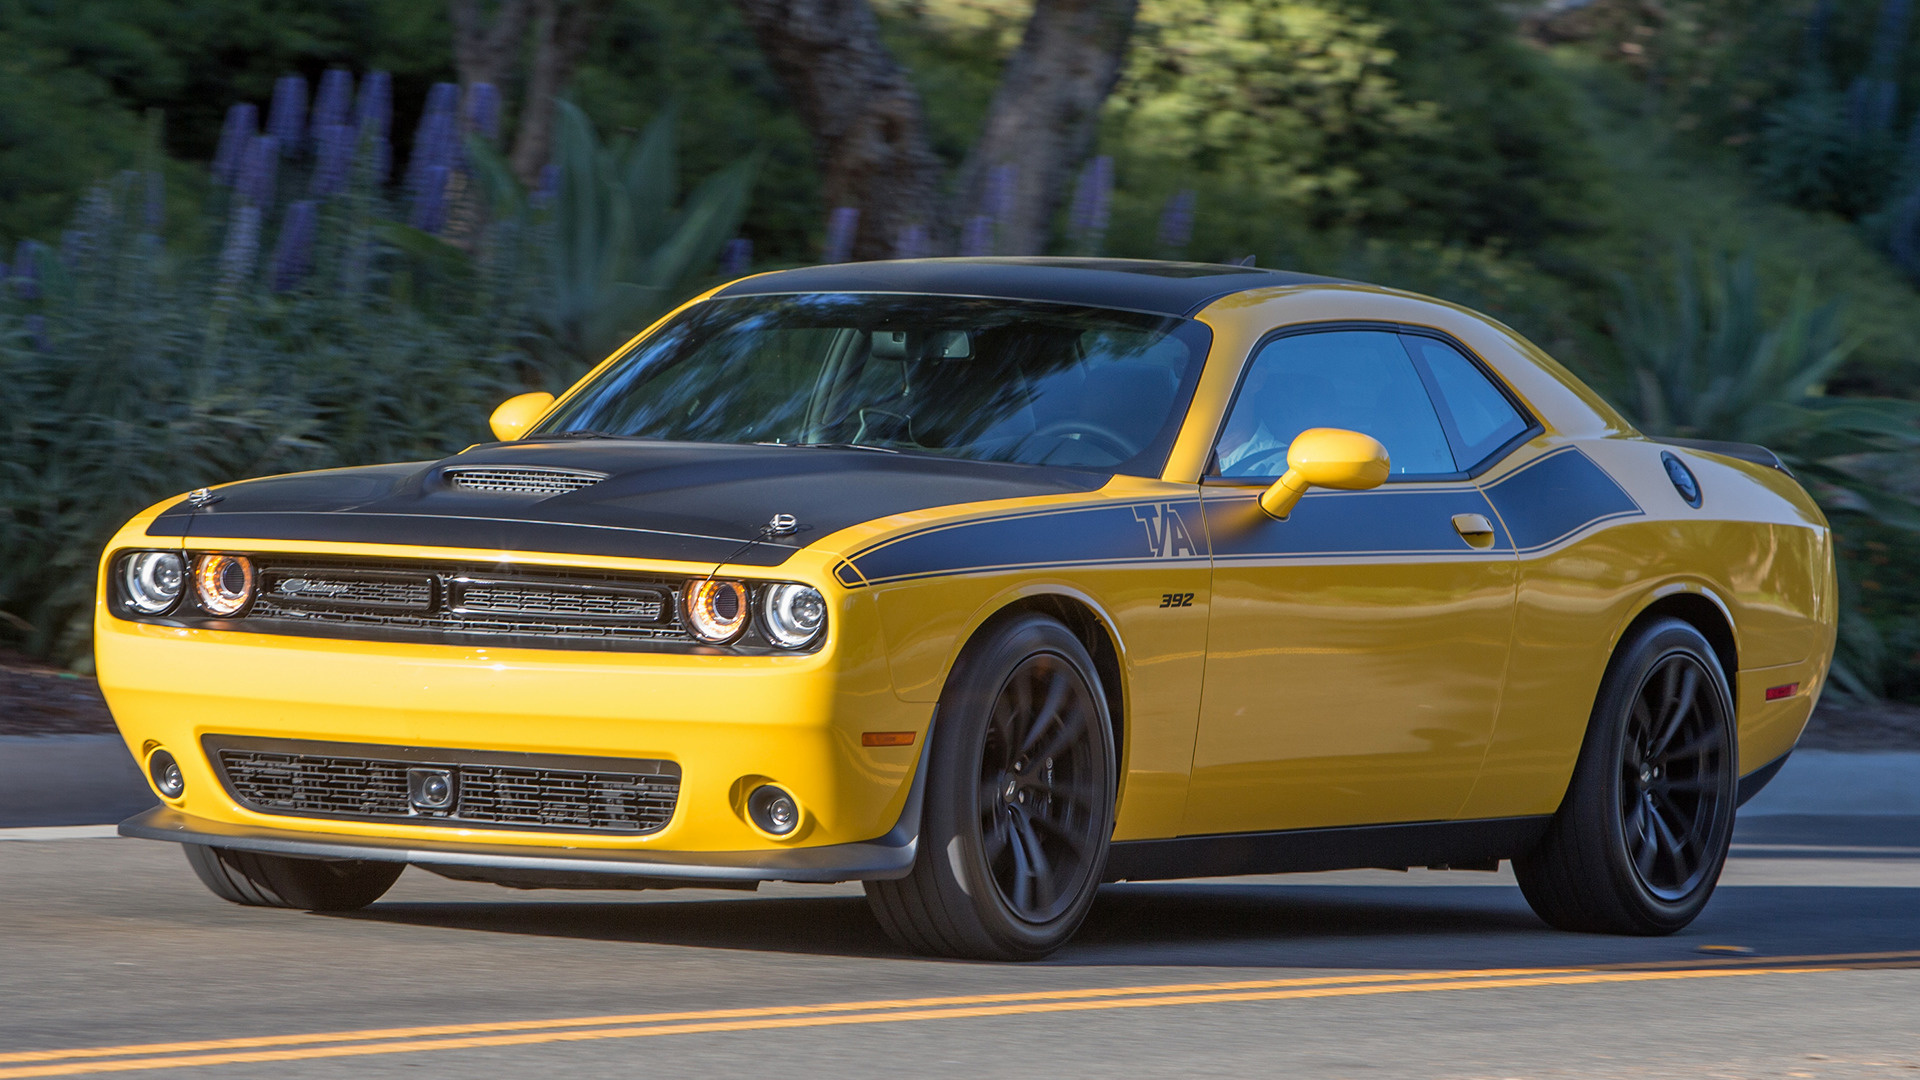 dodge ta meaning 2017 Dodge Challenger T/A 392 - Wallpapers and HD Images